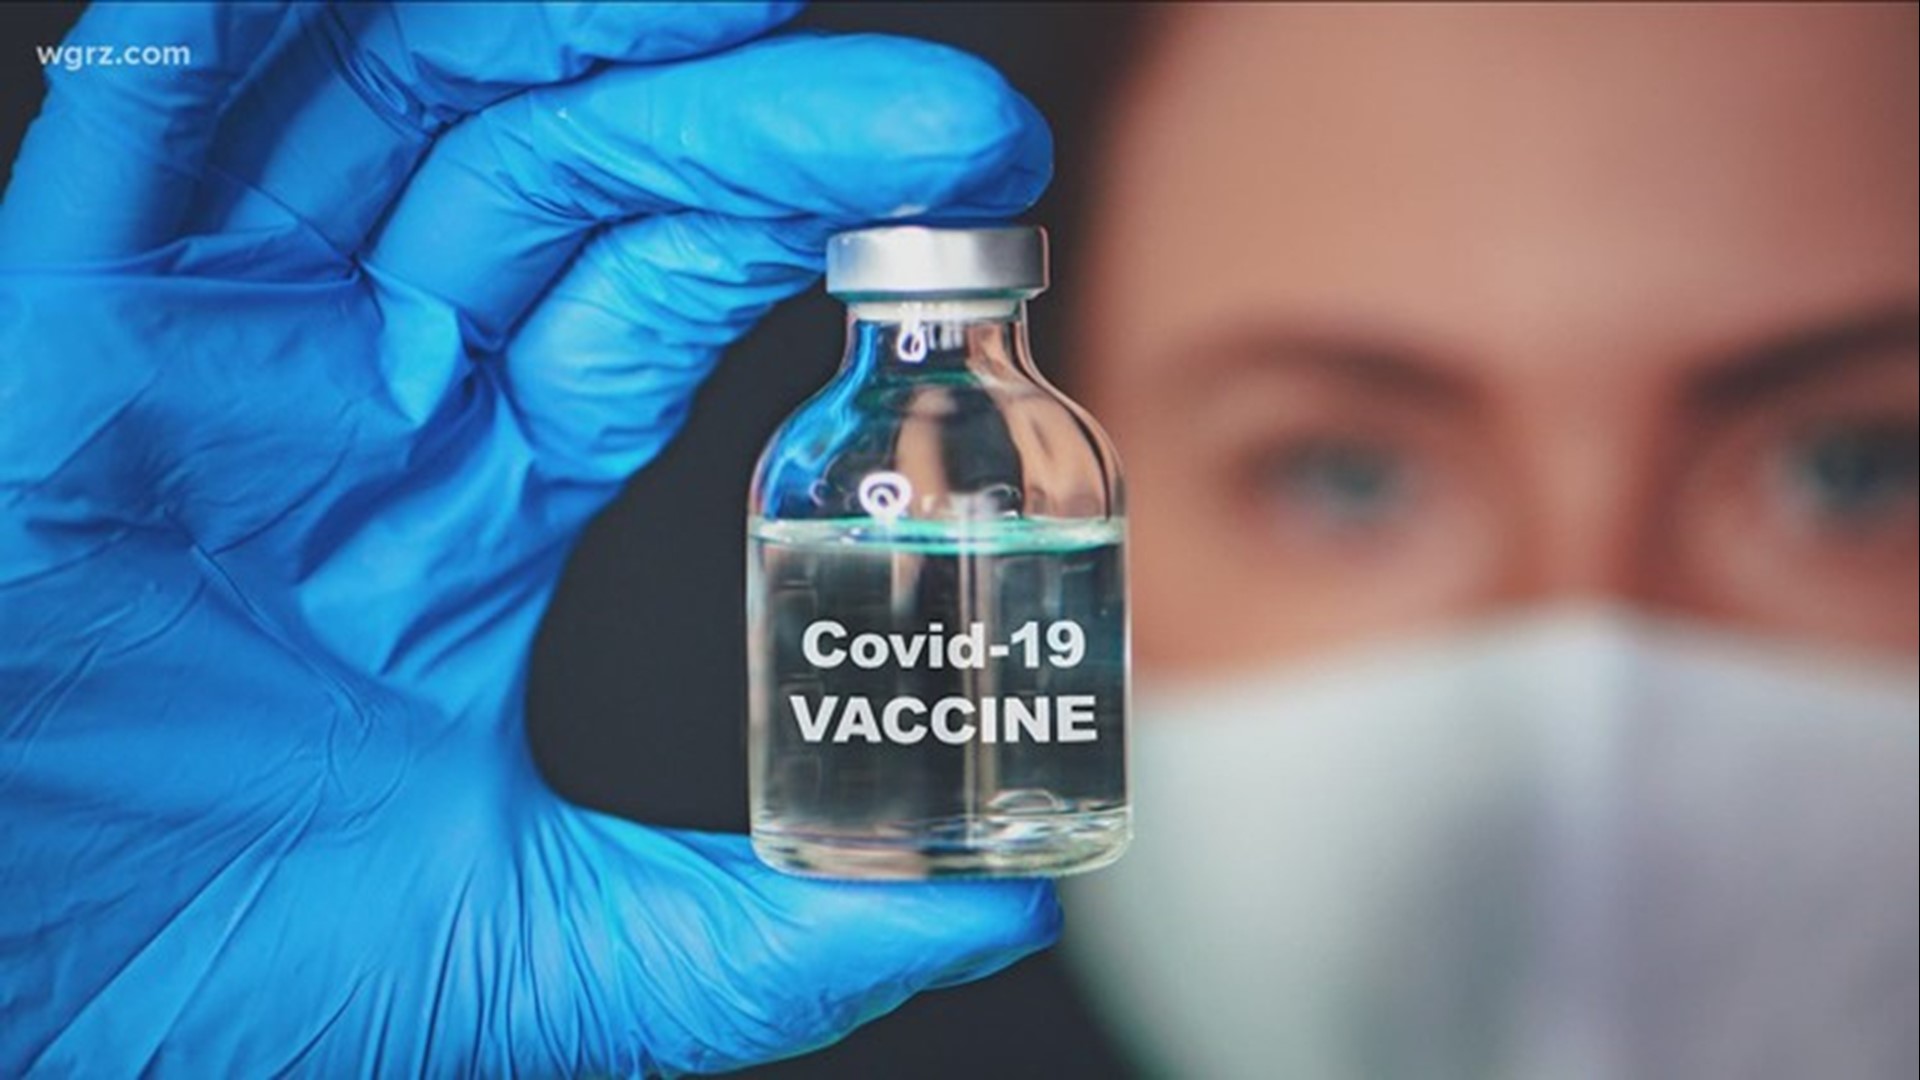 S.C. businesses are preparing to implement federal vaccine, testing rules after the deadline to comply was announced Thursday. The Governor says he will fight back.